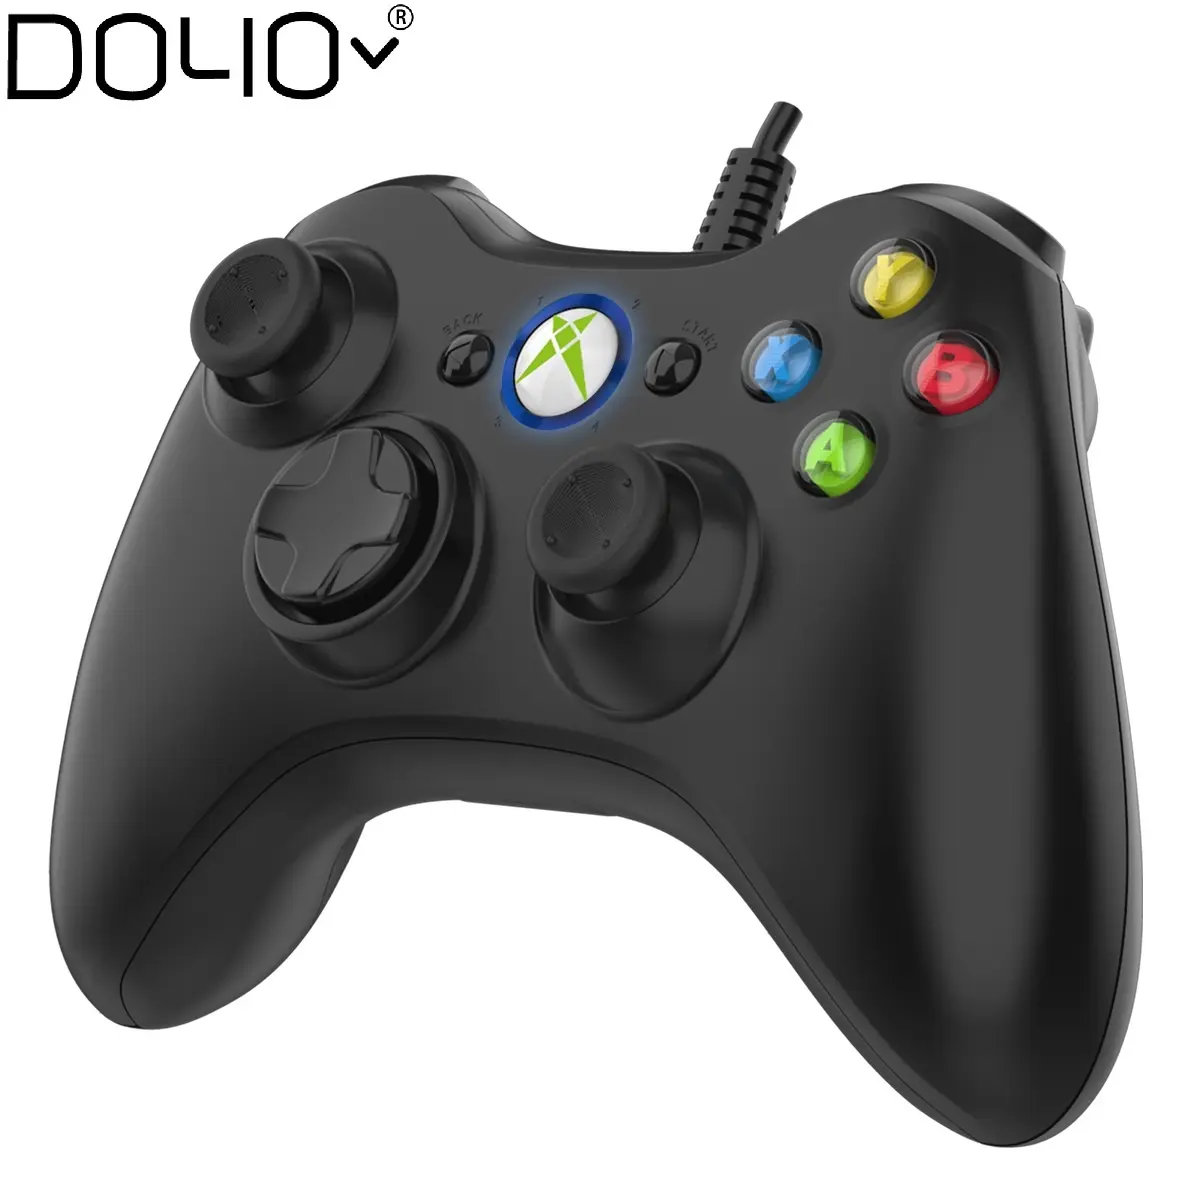 Dual Vibration USB Gamepad Wired Xbox 360 game Controller for PC /Xbox360 / Slim